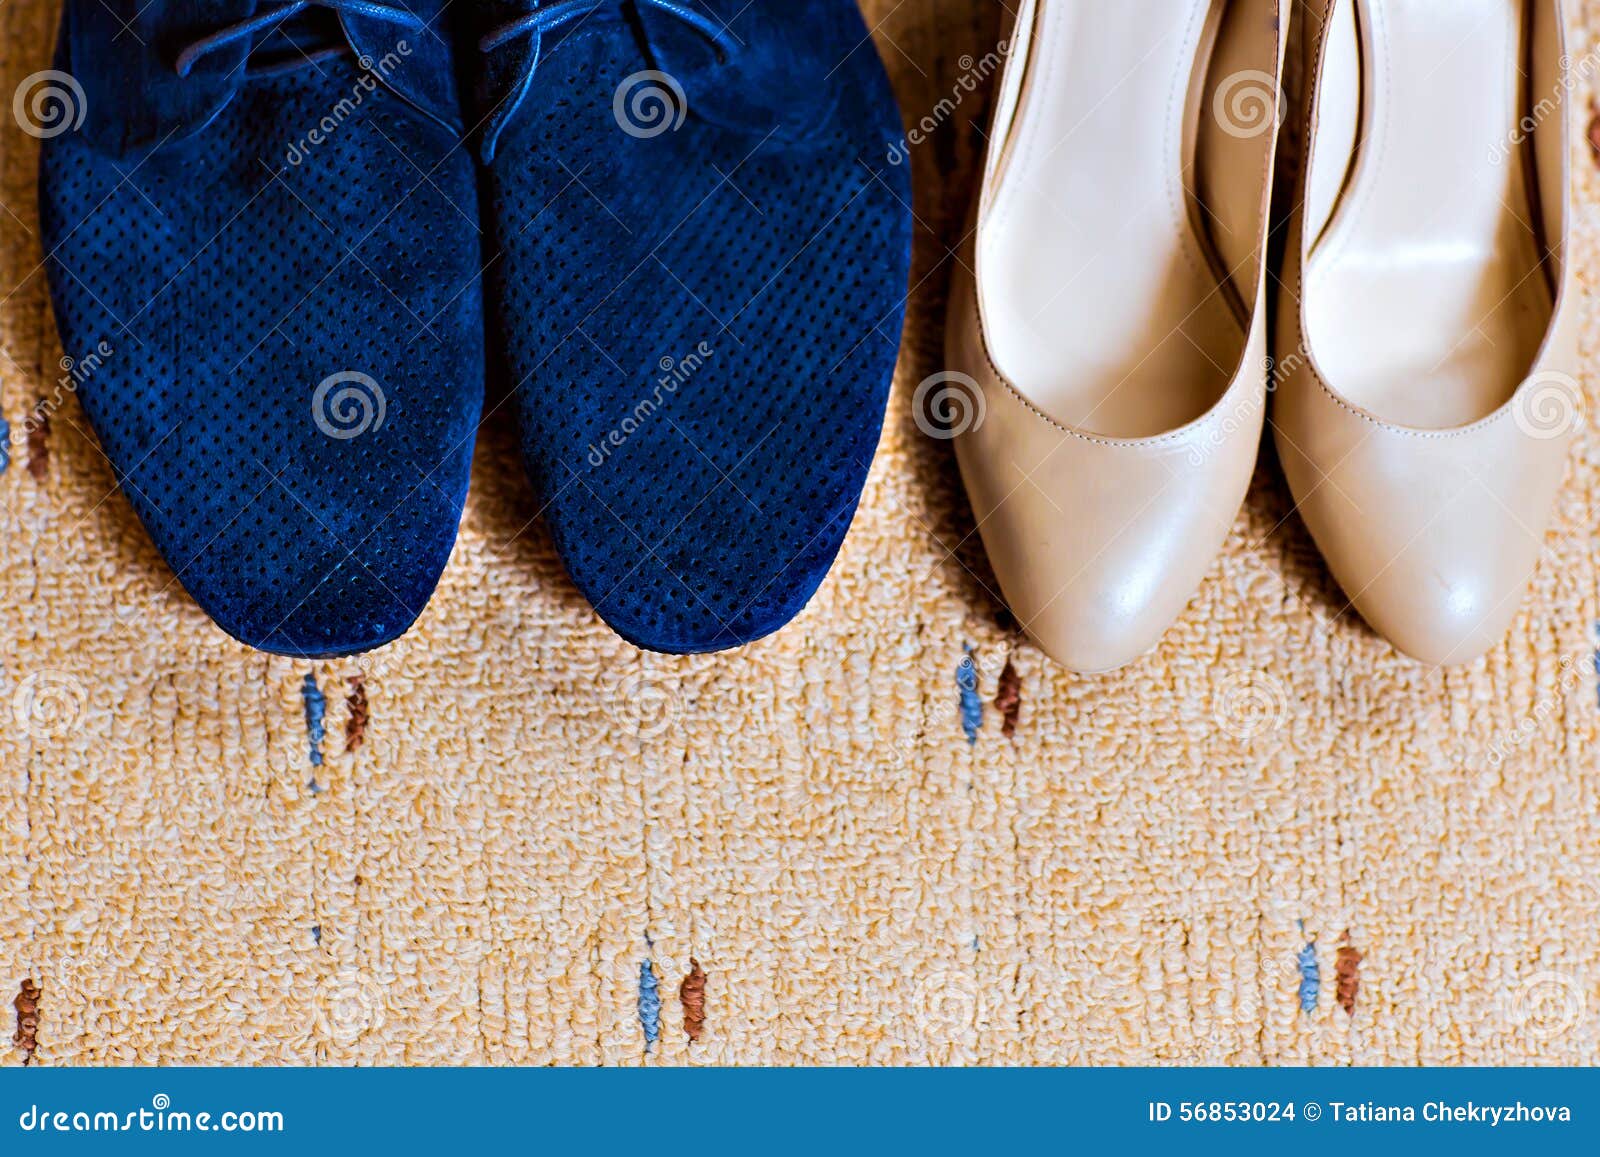 Man and woman shoes stock photo. Image of business, girl - 56853024